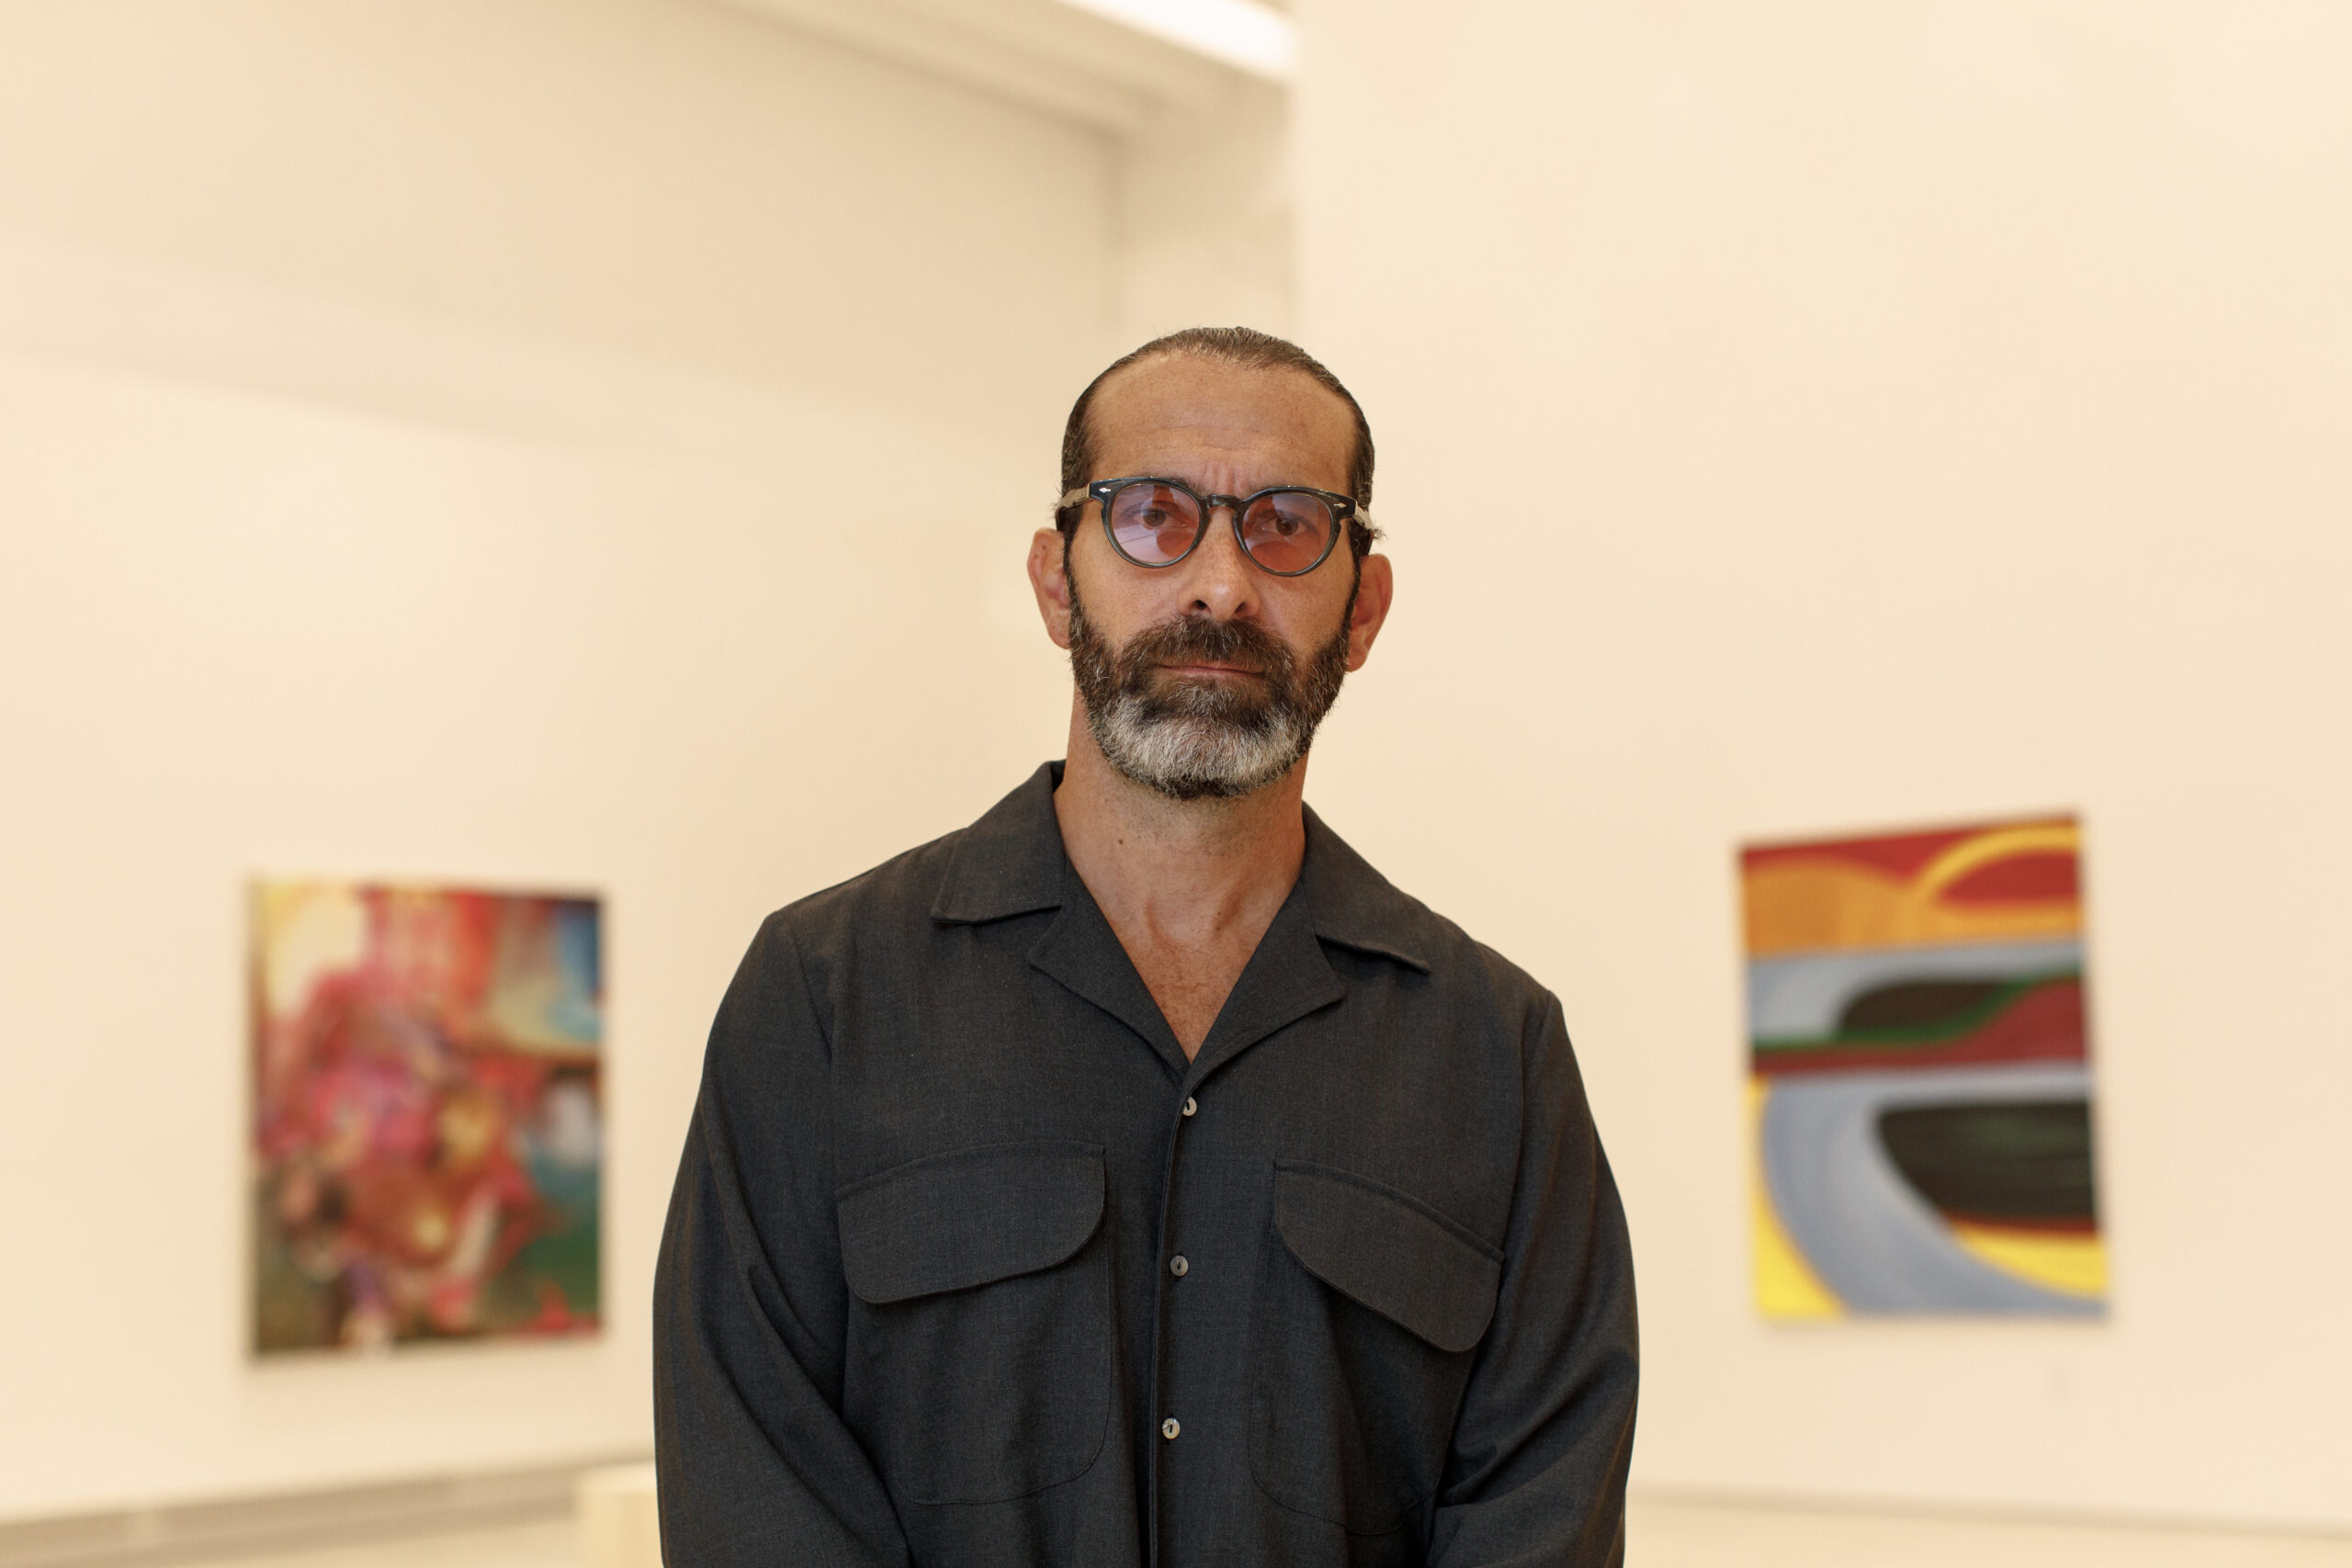 Man with grey beard and glasses standing in art gallery